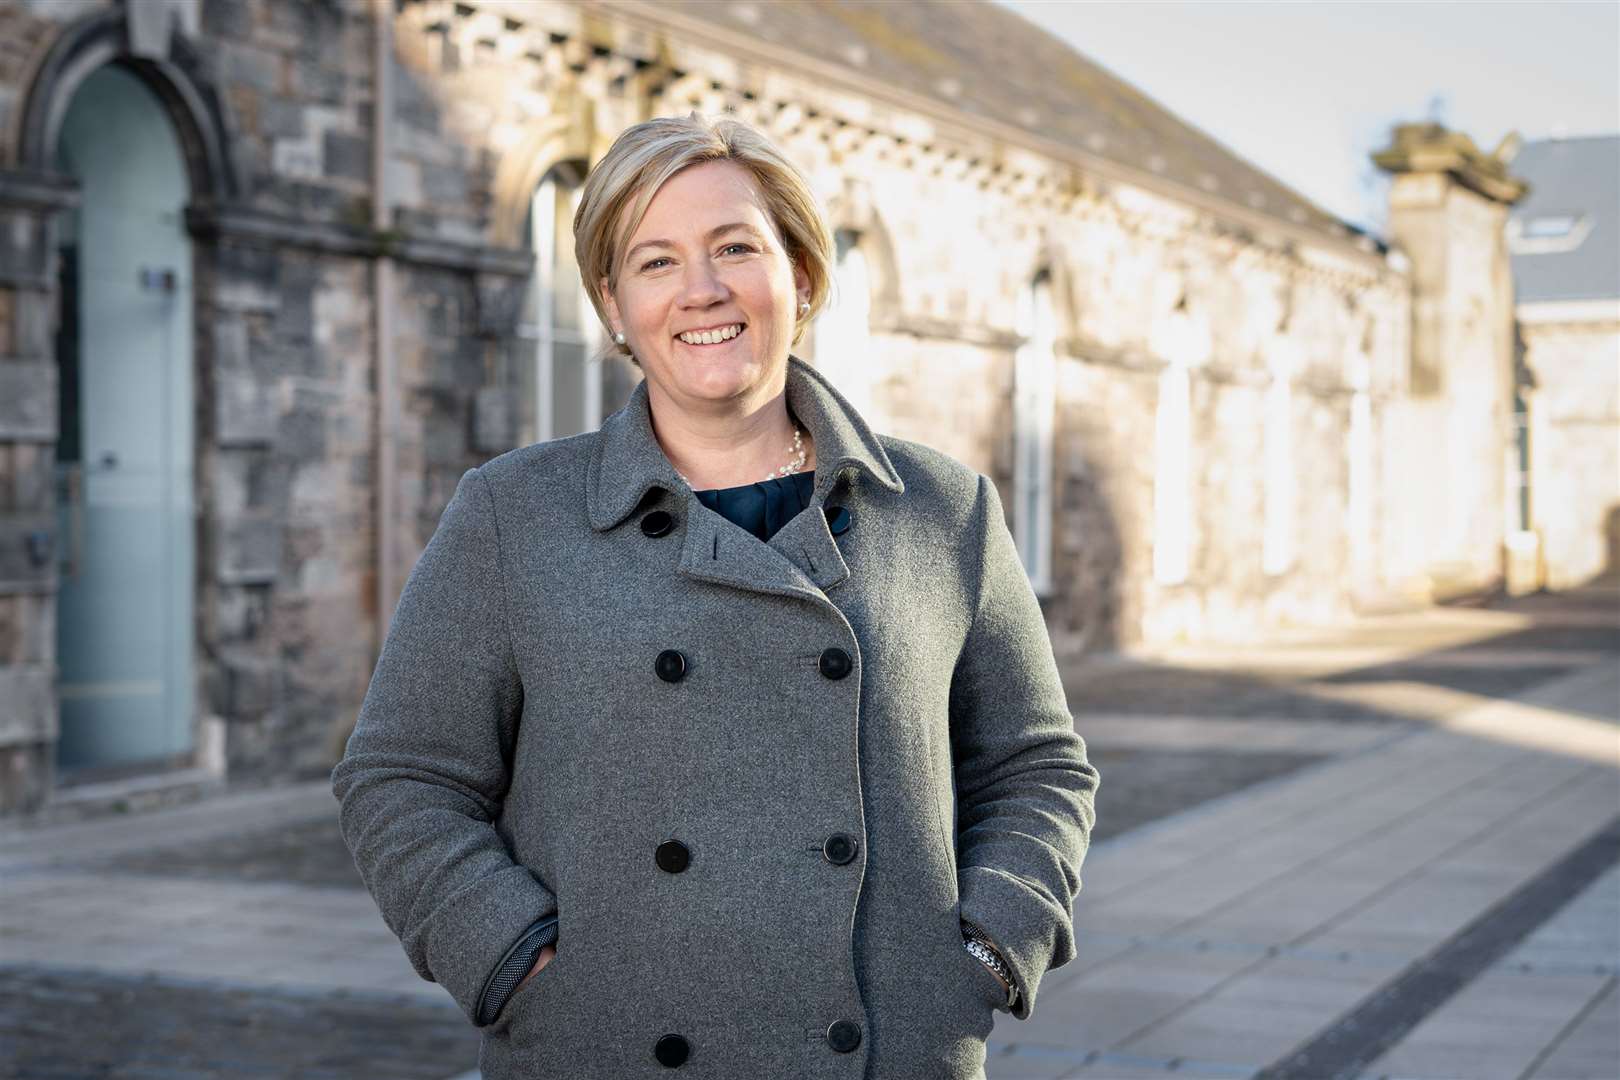 Sarah-Jane Laing, chief executive of Scottish Land and Estates, says great care and thought needs to be given to plan recovery and regrowth in rural areas.